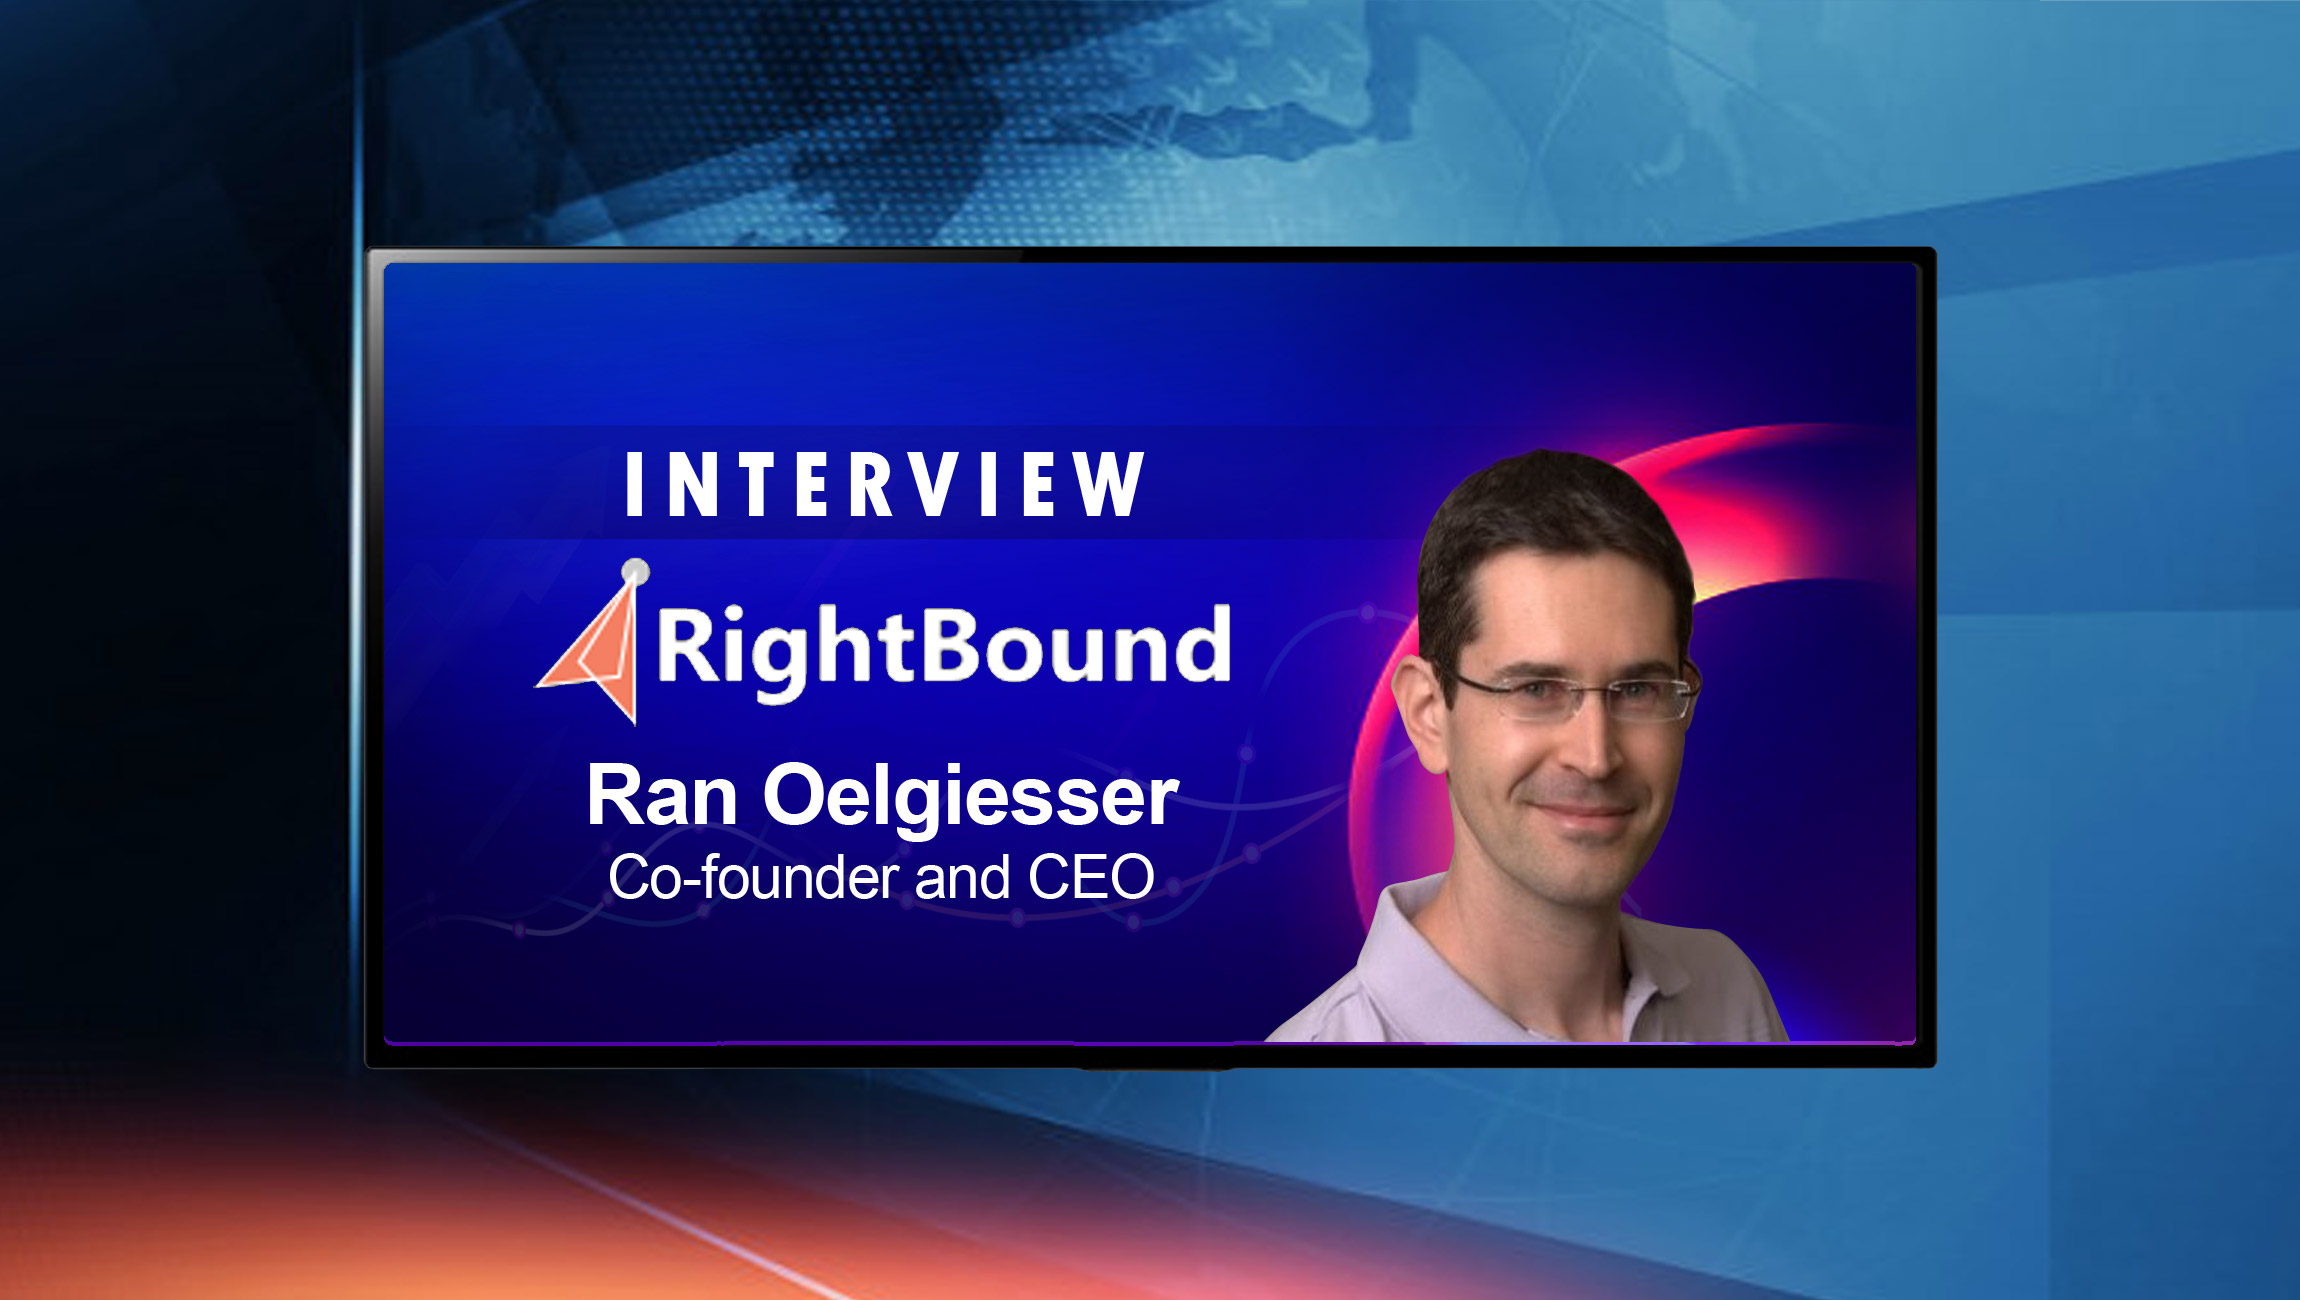 SalesTechStar Interview with Ran Oelgiesser, Co-founder and CEO of RightBound